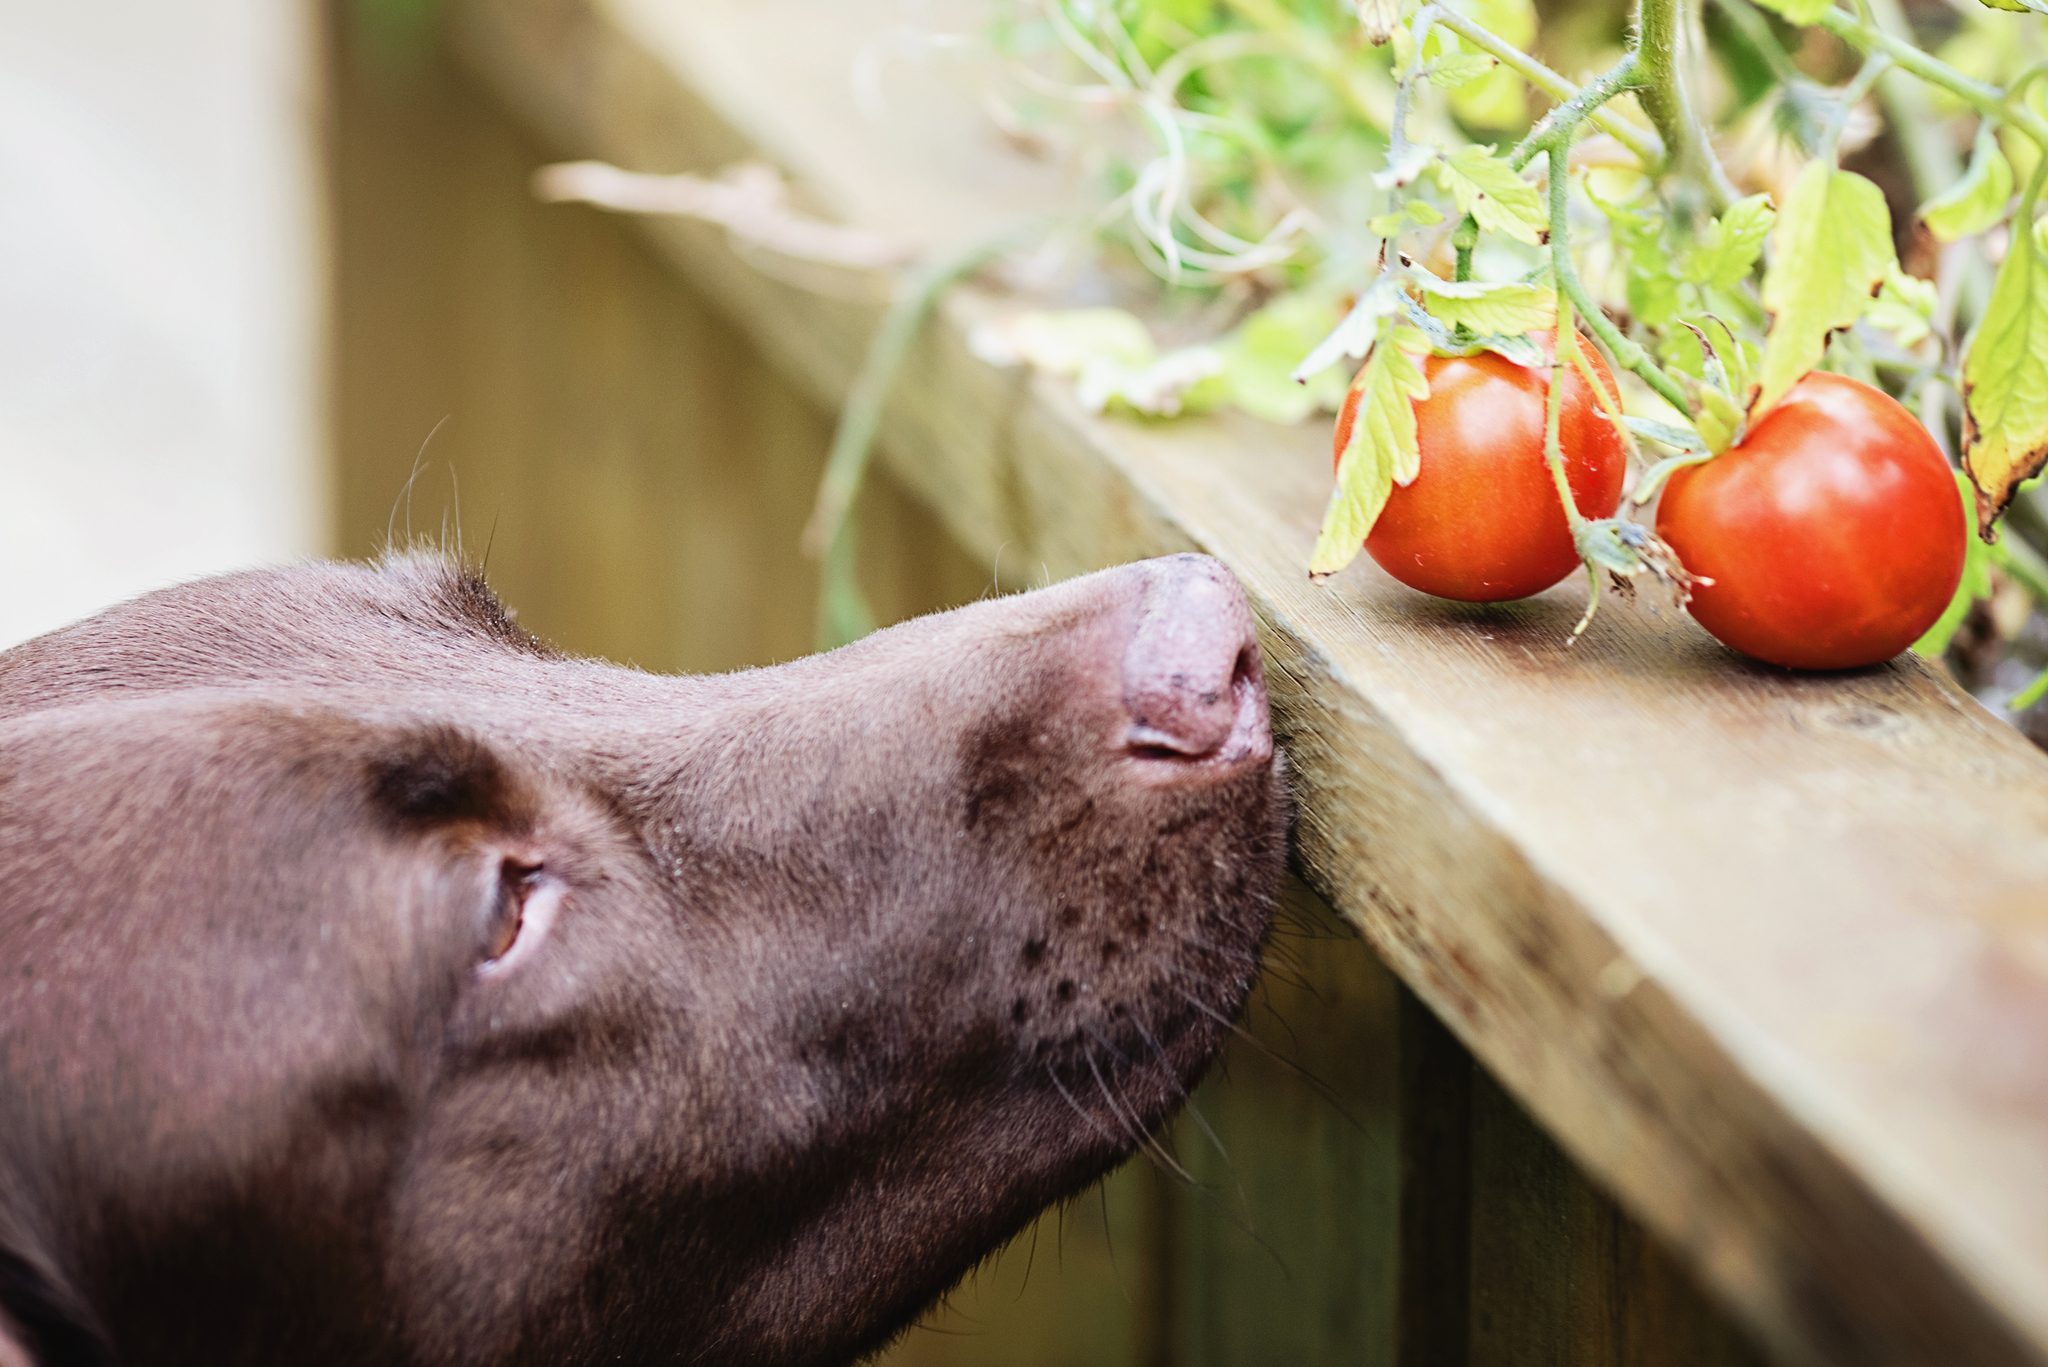 Can Dogs Eat Tomatoes?